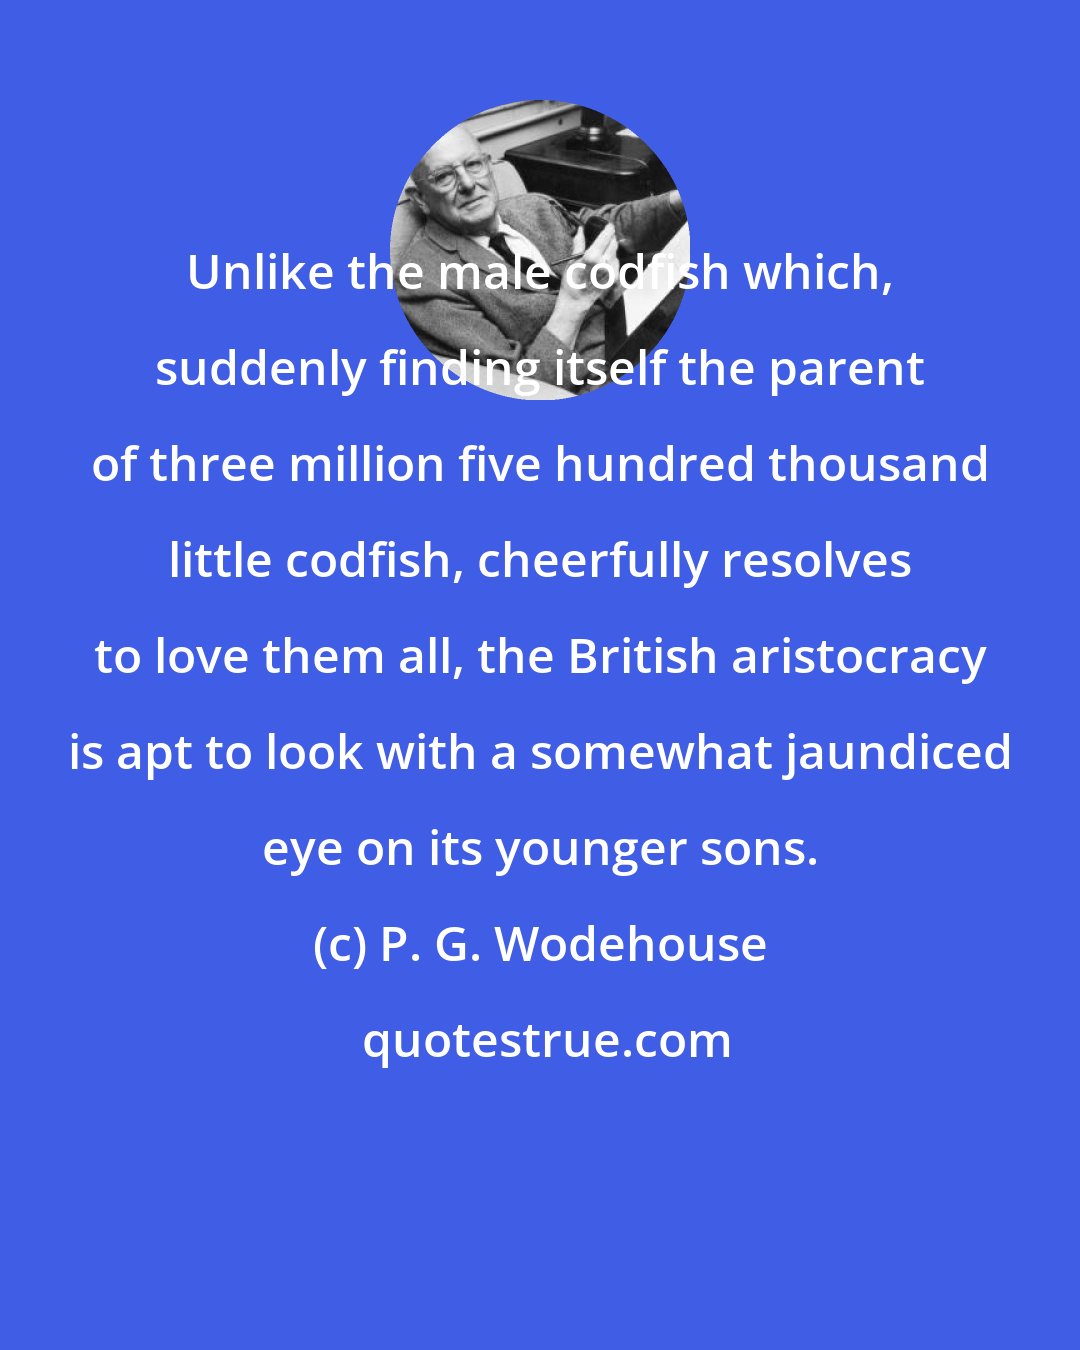 P. G. Wodehouse: Unlike the male codfish which, suddenly finding itself the parent of three million five hundred thousand little codfish, cheerfully resolves to love them all, the British aristocracy is apt to look with a somewhat jaundiced eye on its younger sons.